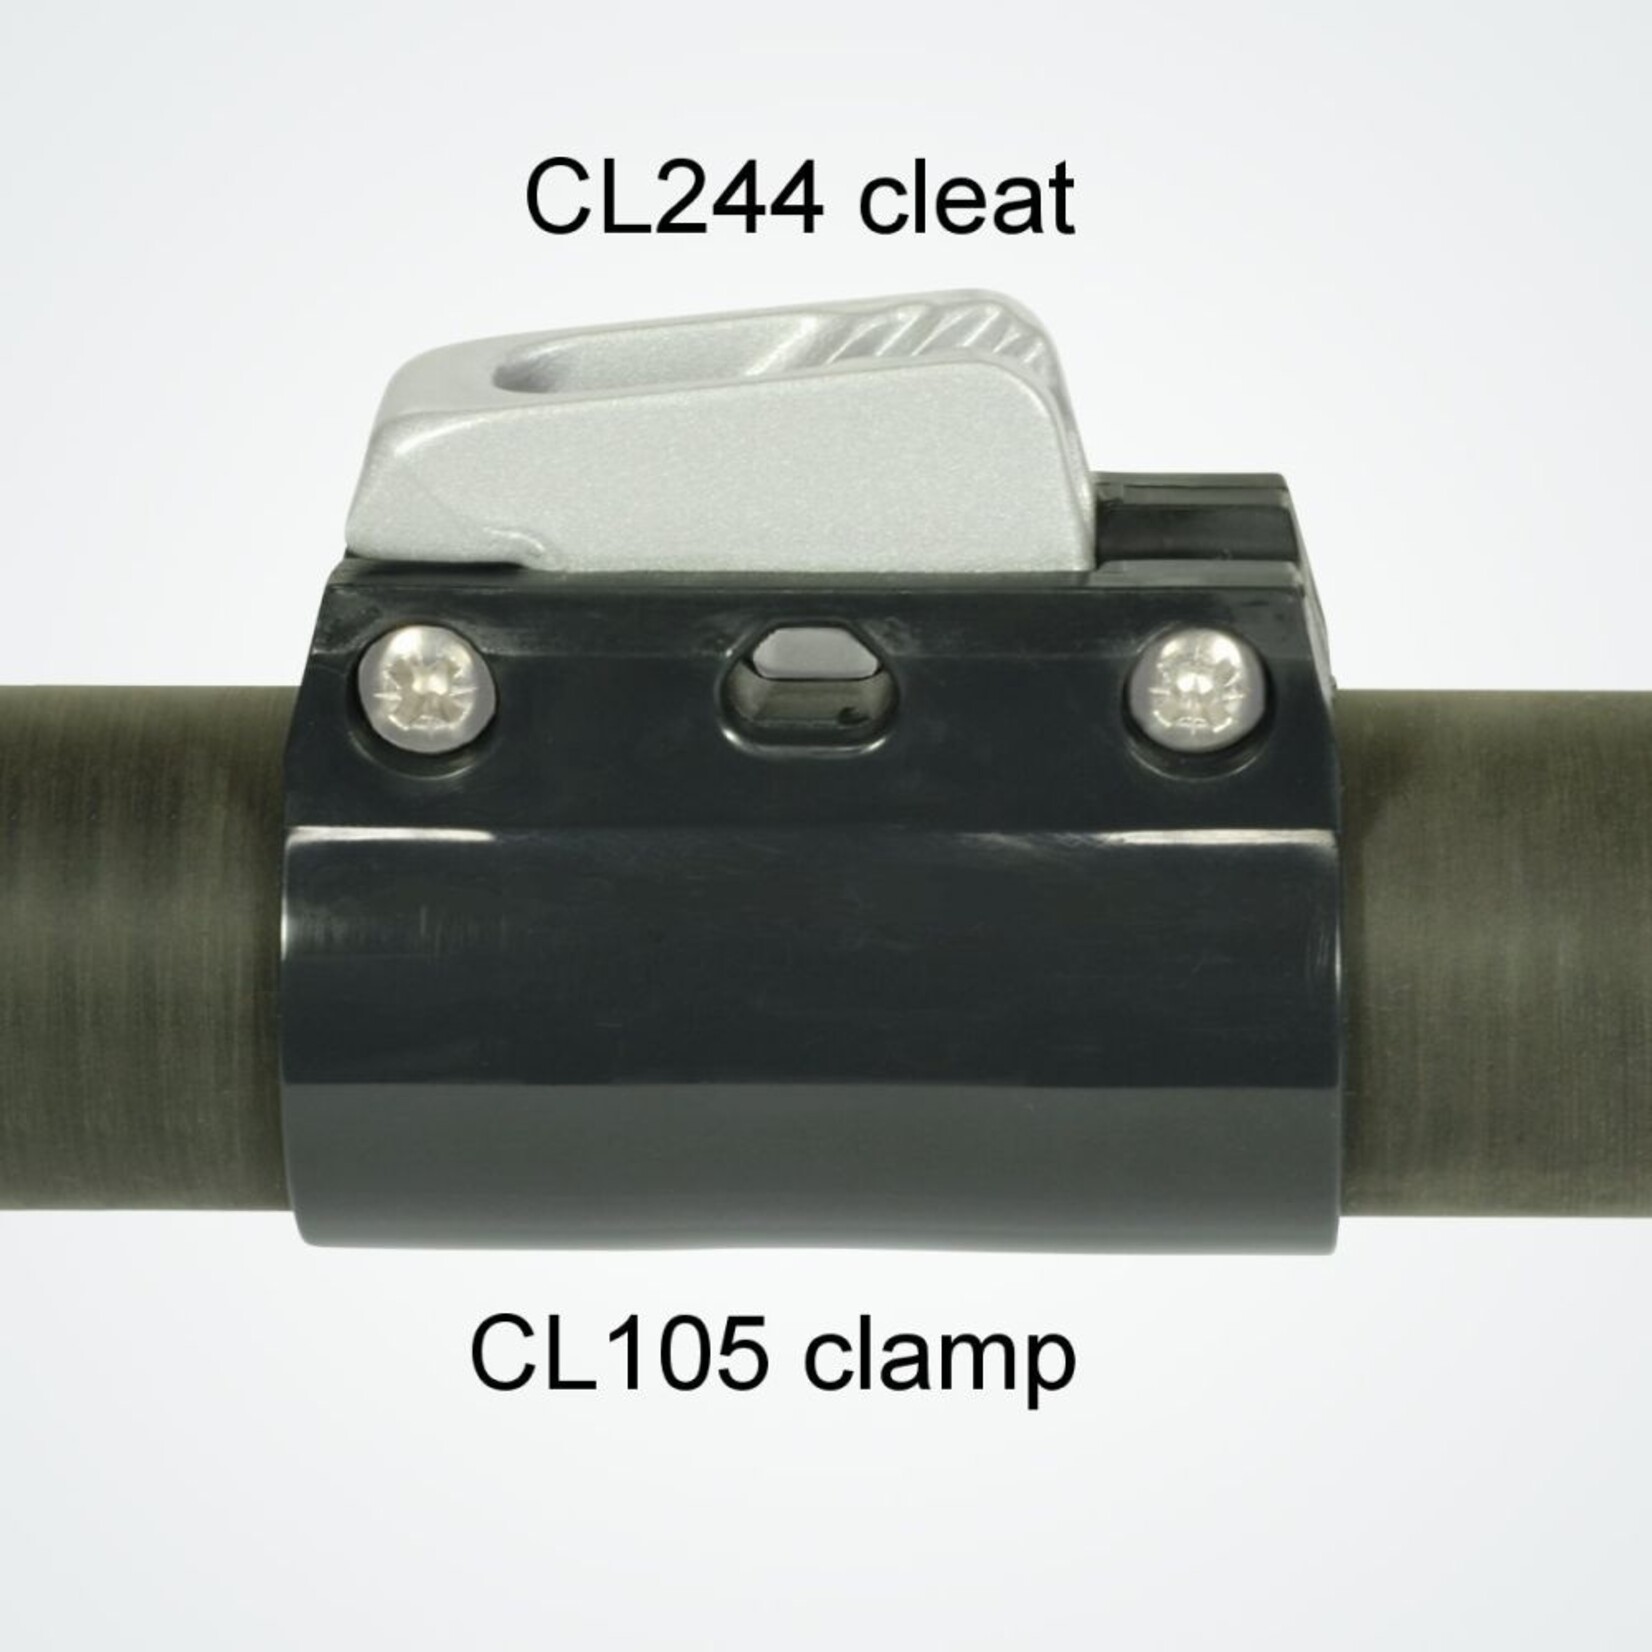 Clamcleat Clamp for 103-105mm circumference grafietgrijs - Loose